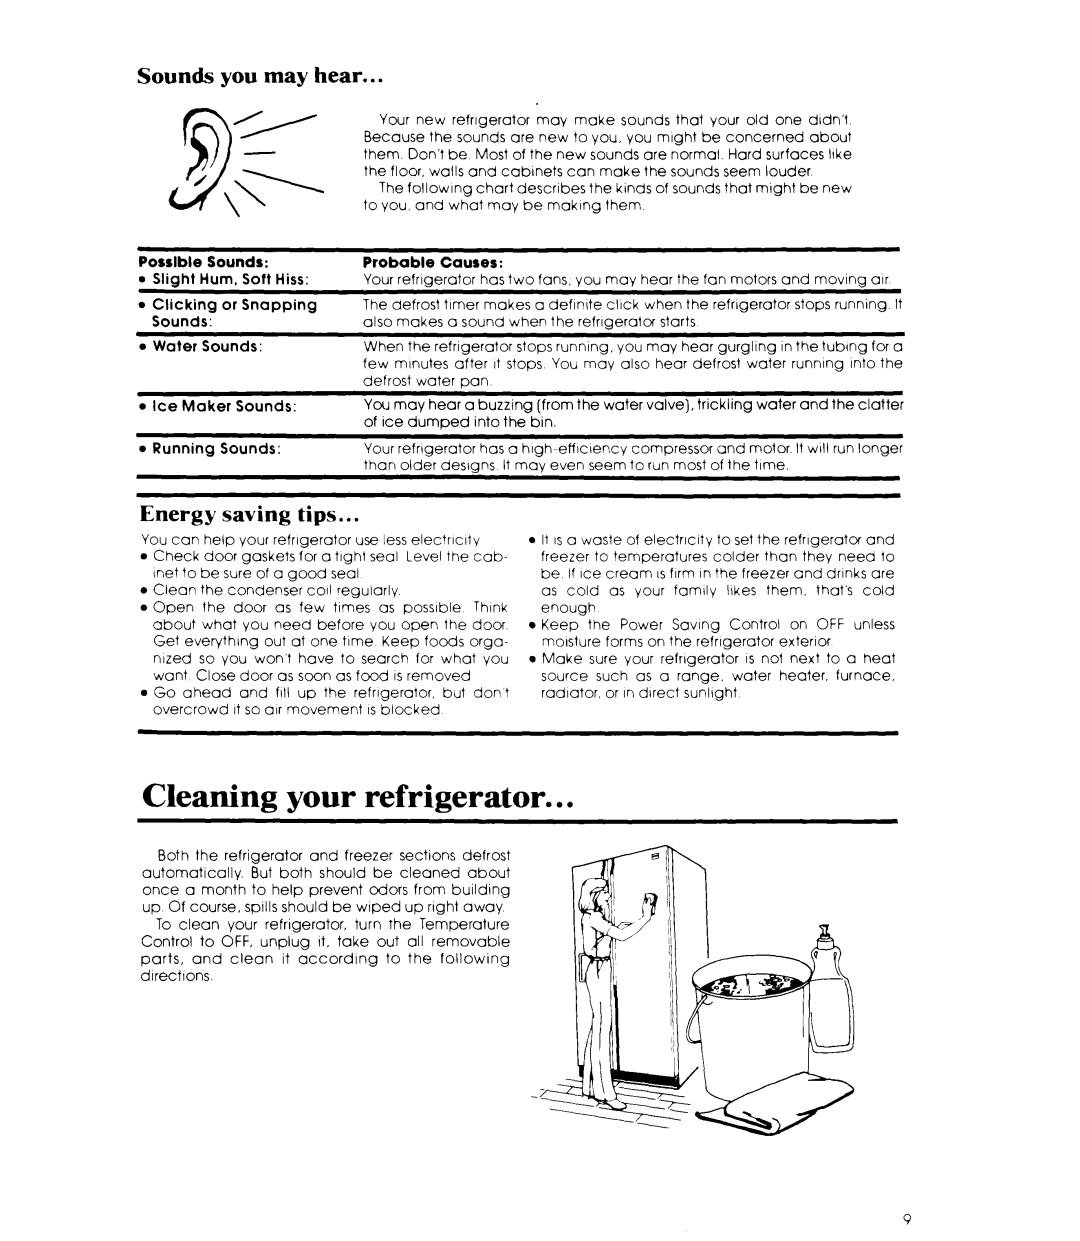 Whirlpool ED22MM manual Cleaning your refrigerator, Sounds you may hear, Energy saving tips 